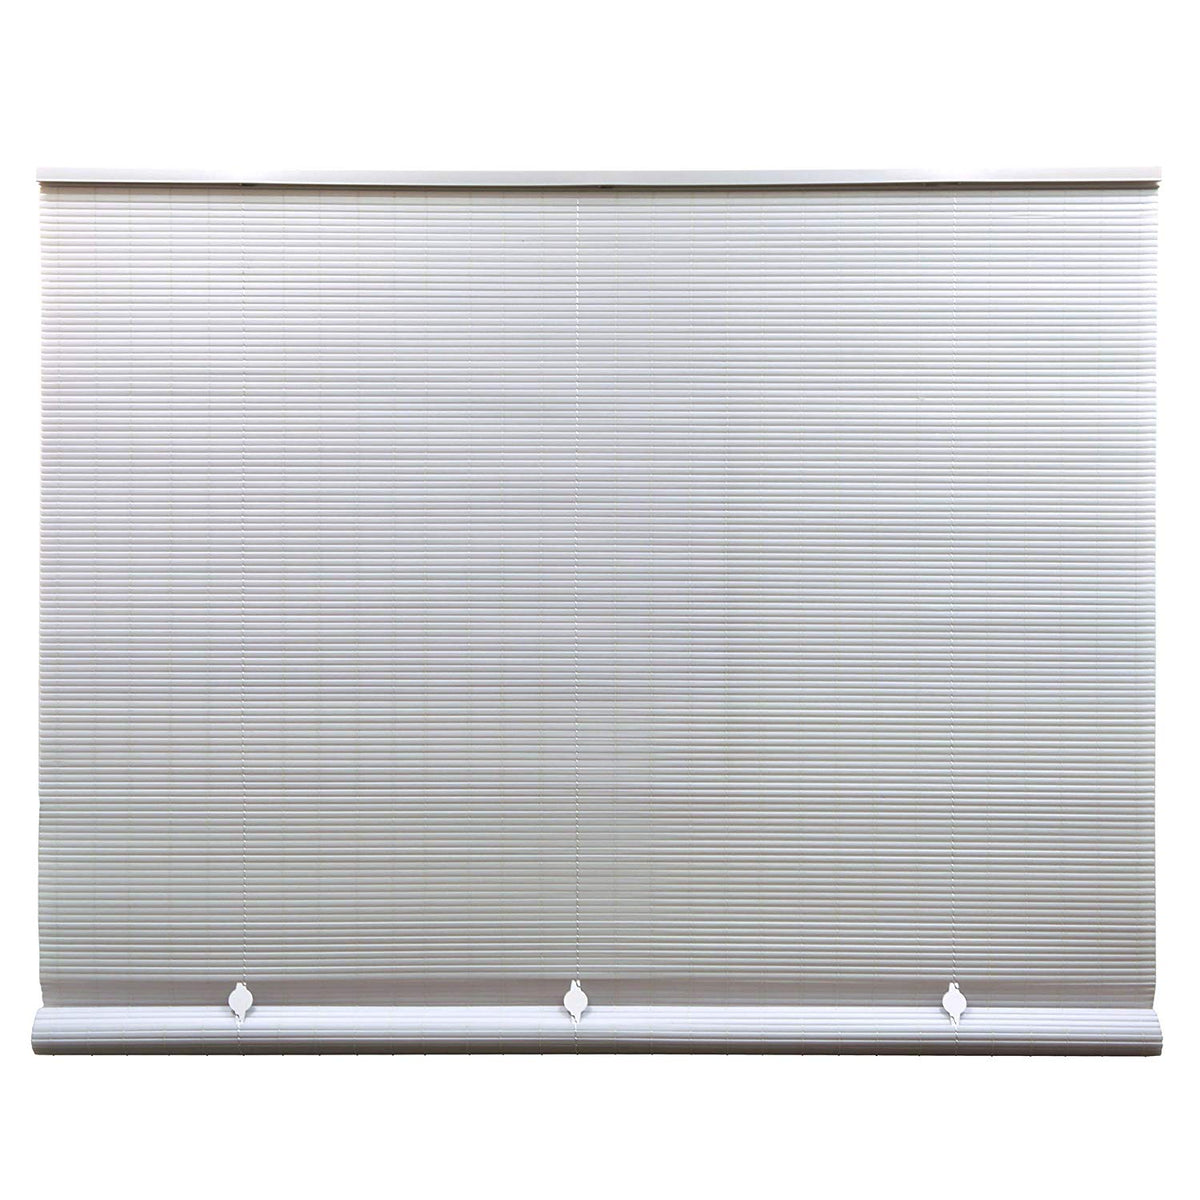 Lewis Hyman 3320166 Cord Free 1/4" Oval Roll Up Blind PVC Shade, White, 72"x72"